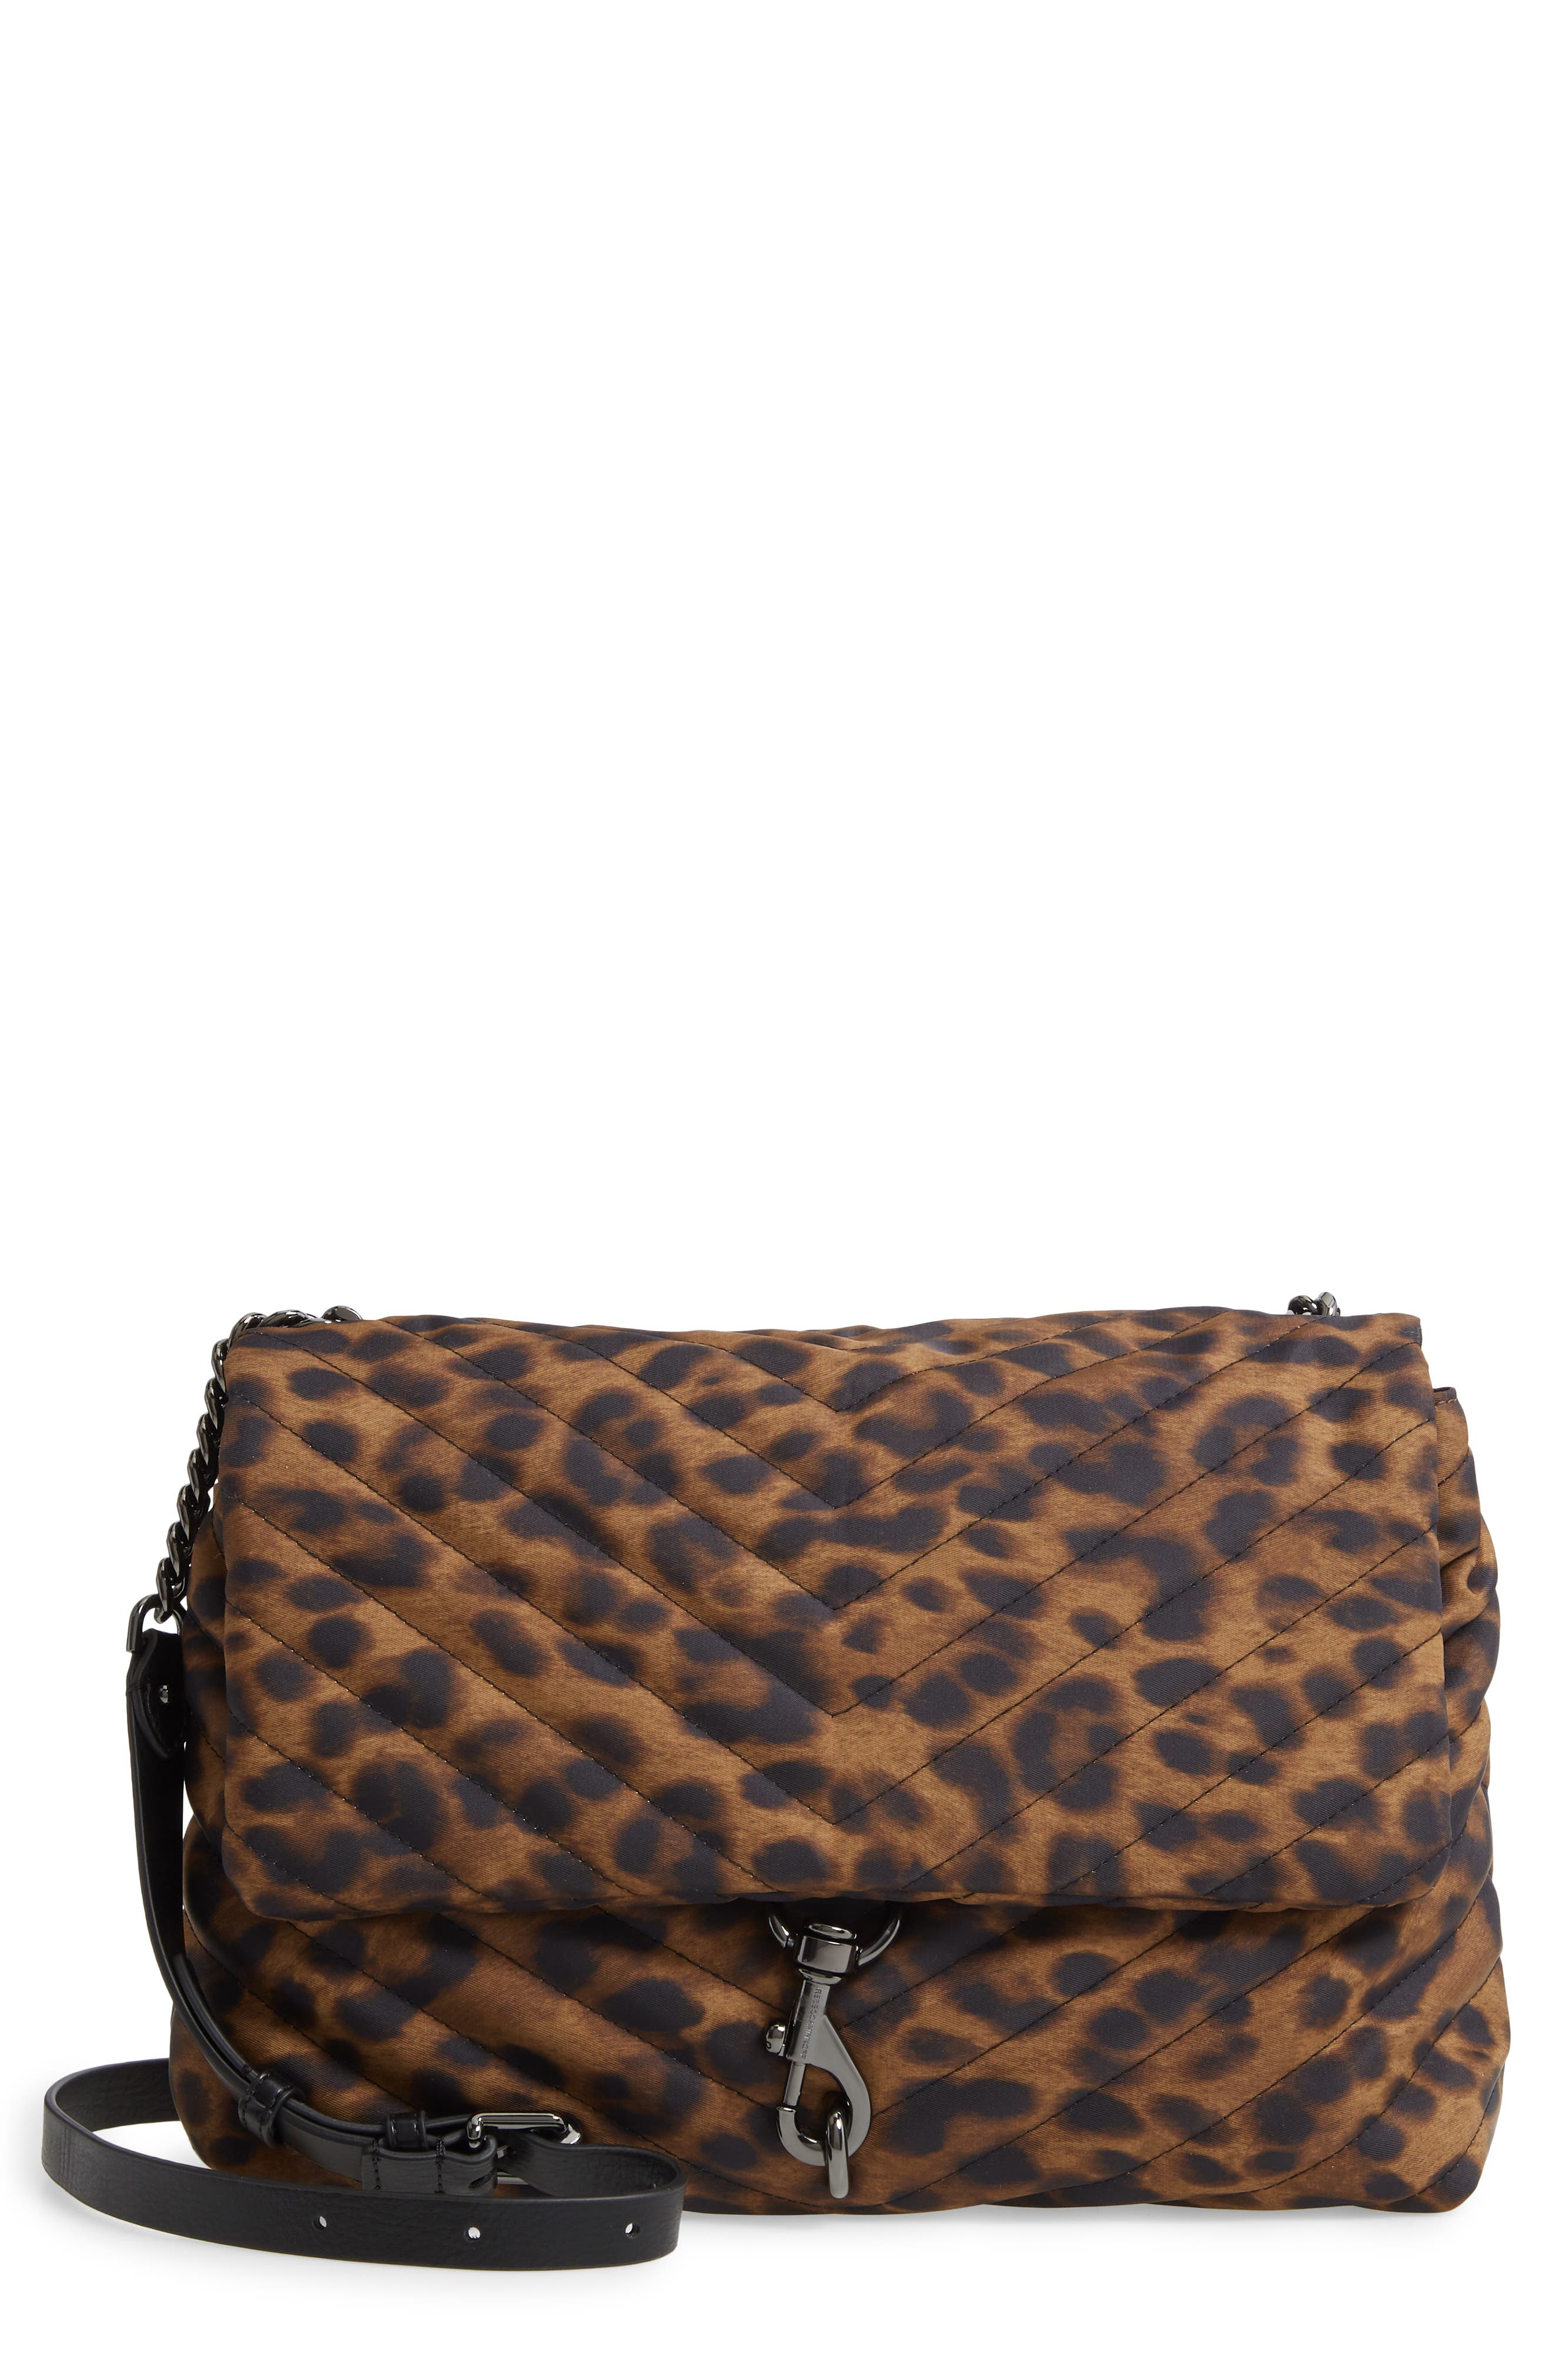 Rebecca Minkoff Edie Jumbo Quilted Nylon Shoulder Bag in Natural Leopard at Nordstrom